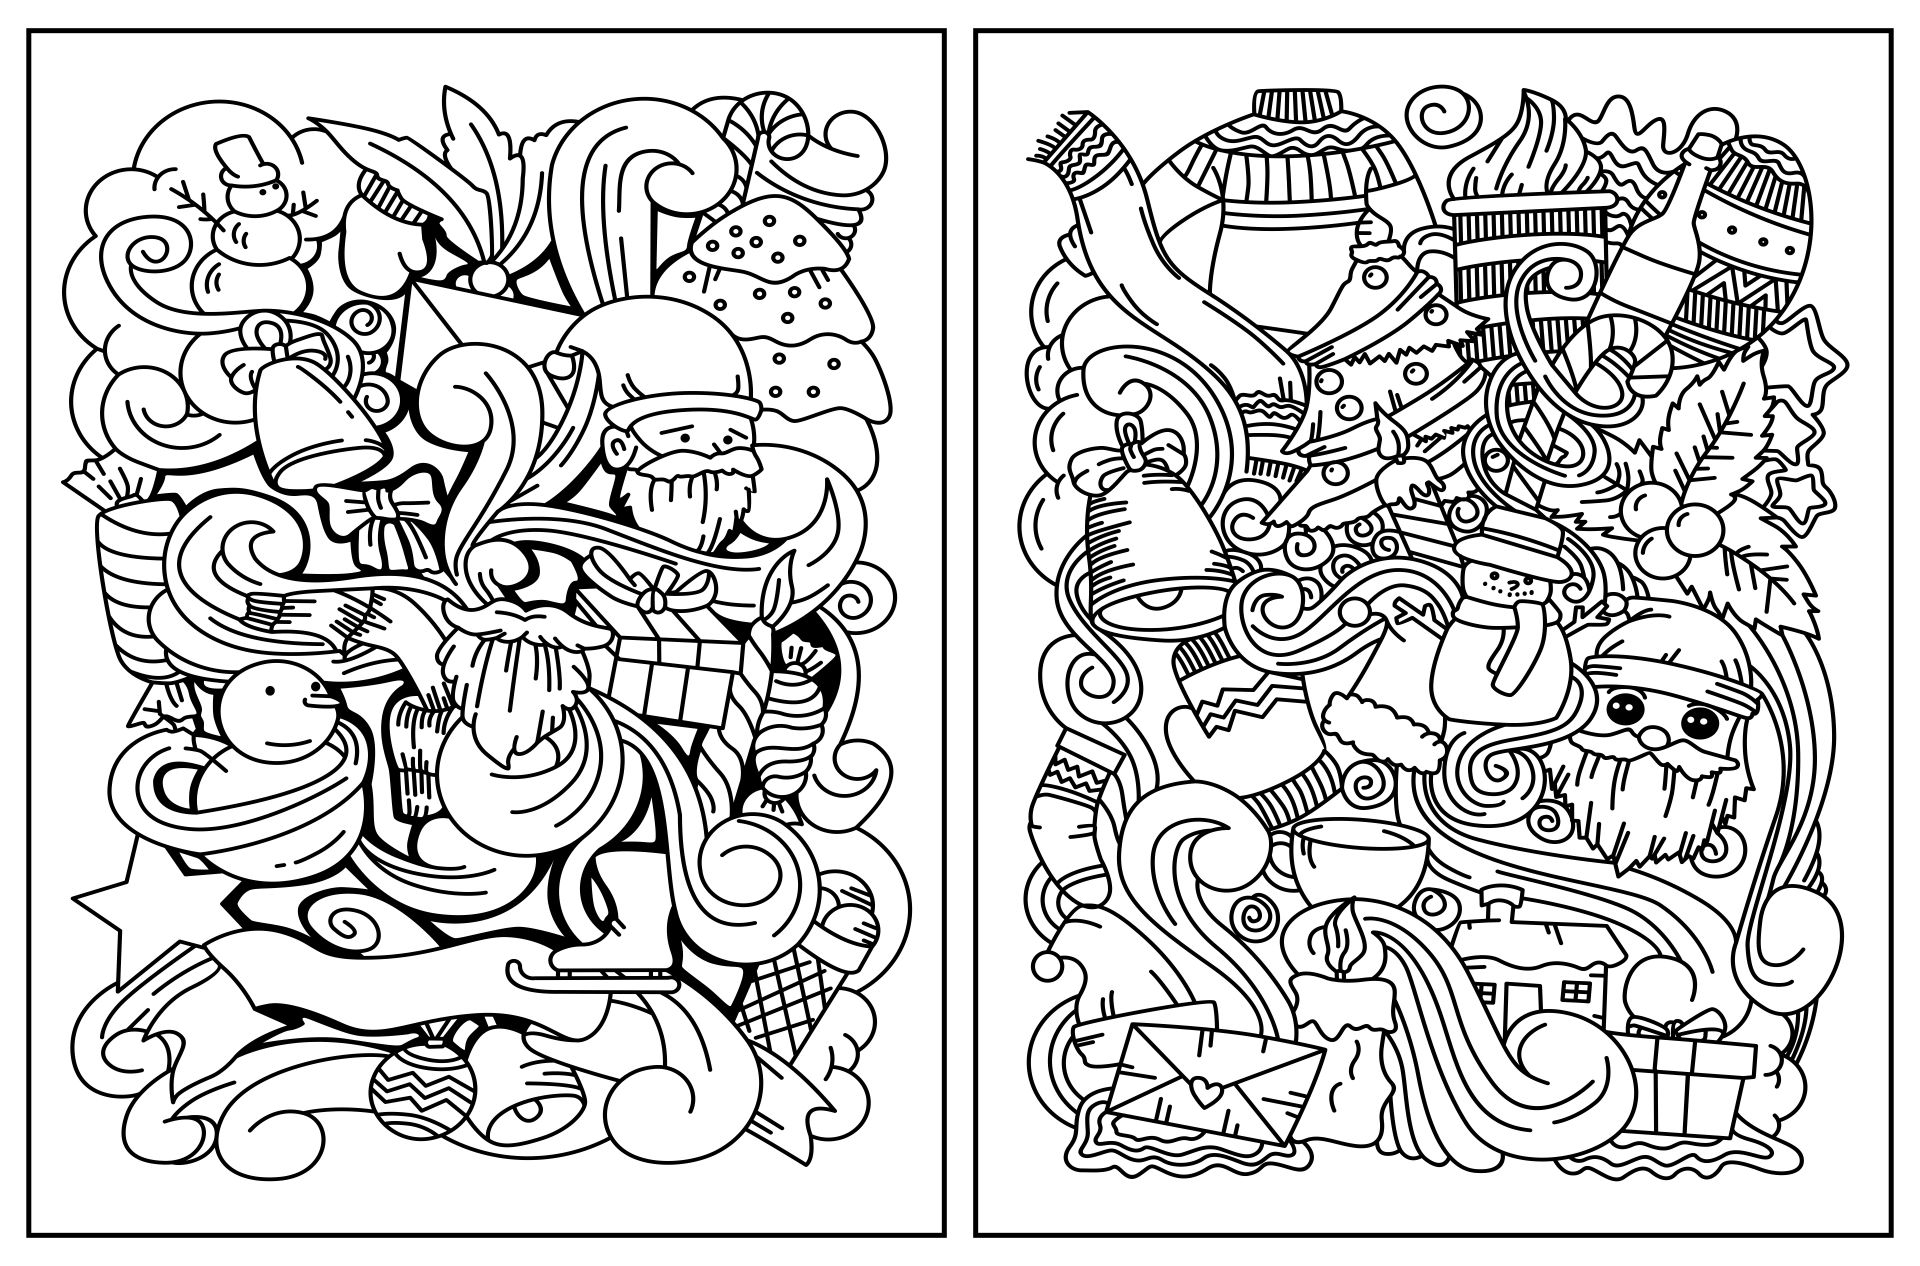 8 Best Images of Printable Coloring Pages Doodle Art ...